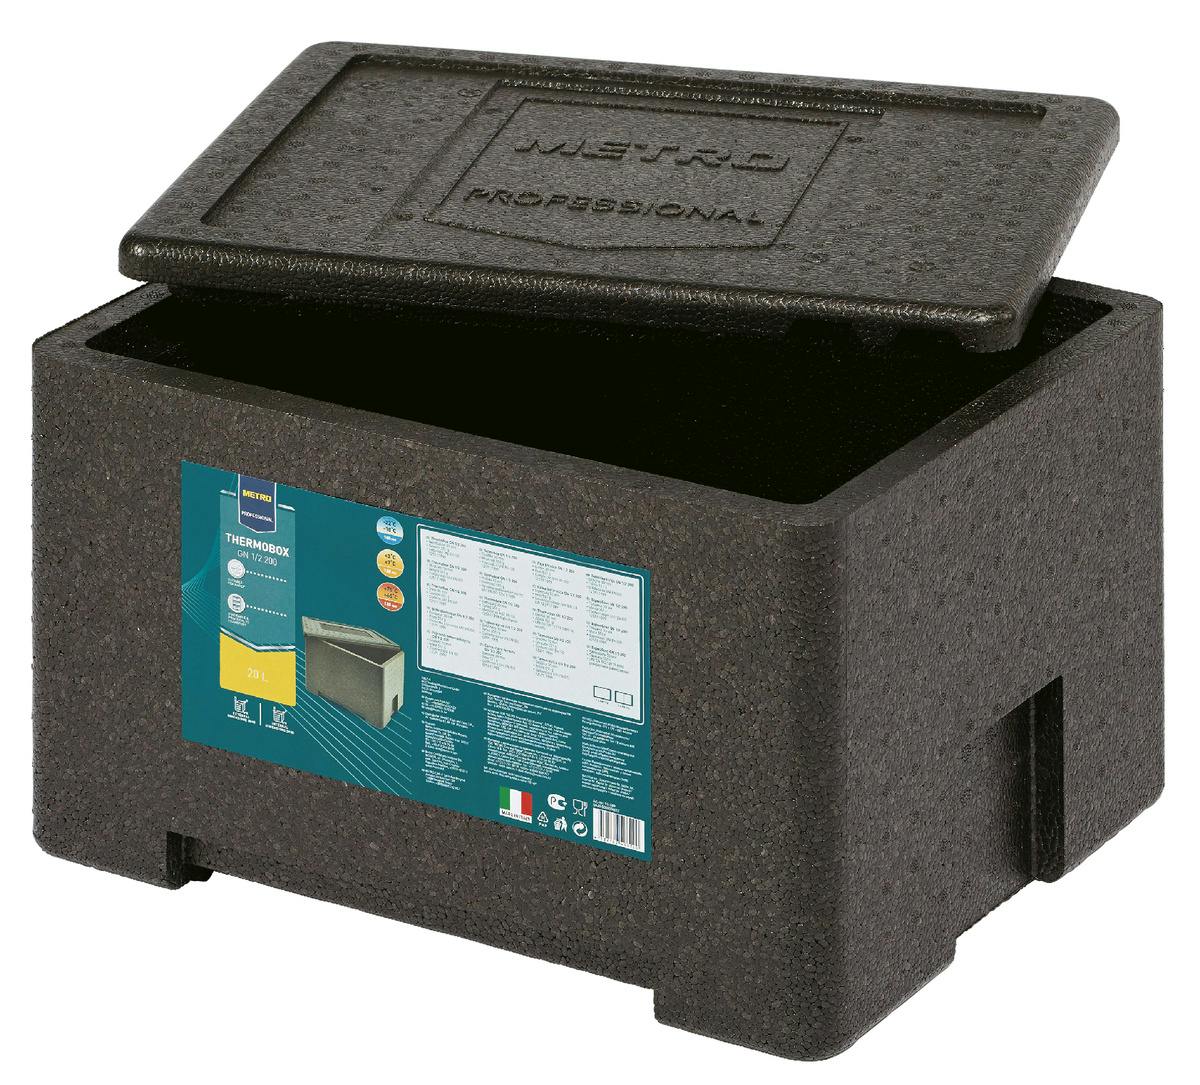 METRO Professional Thermobox GN 1/2 200, EPP, 20 L, Toplader